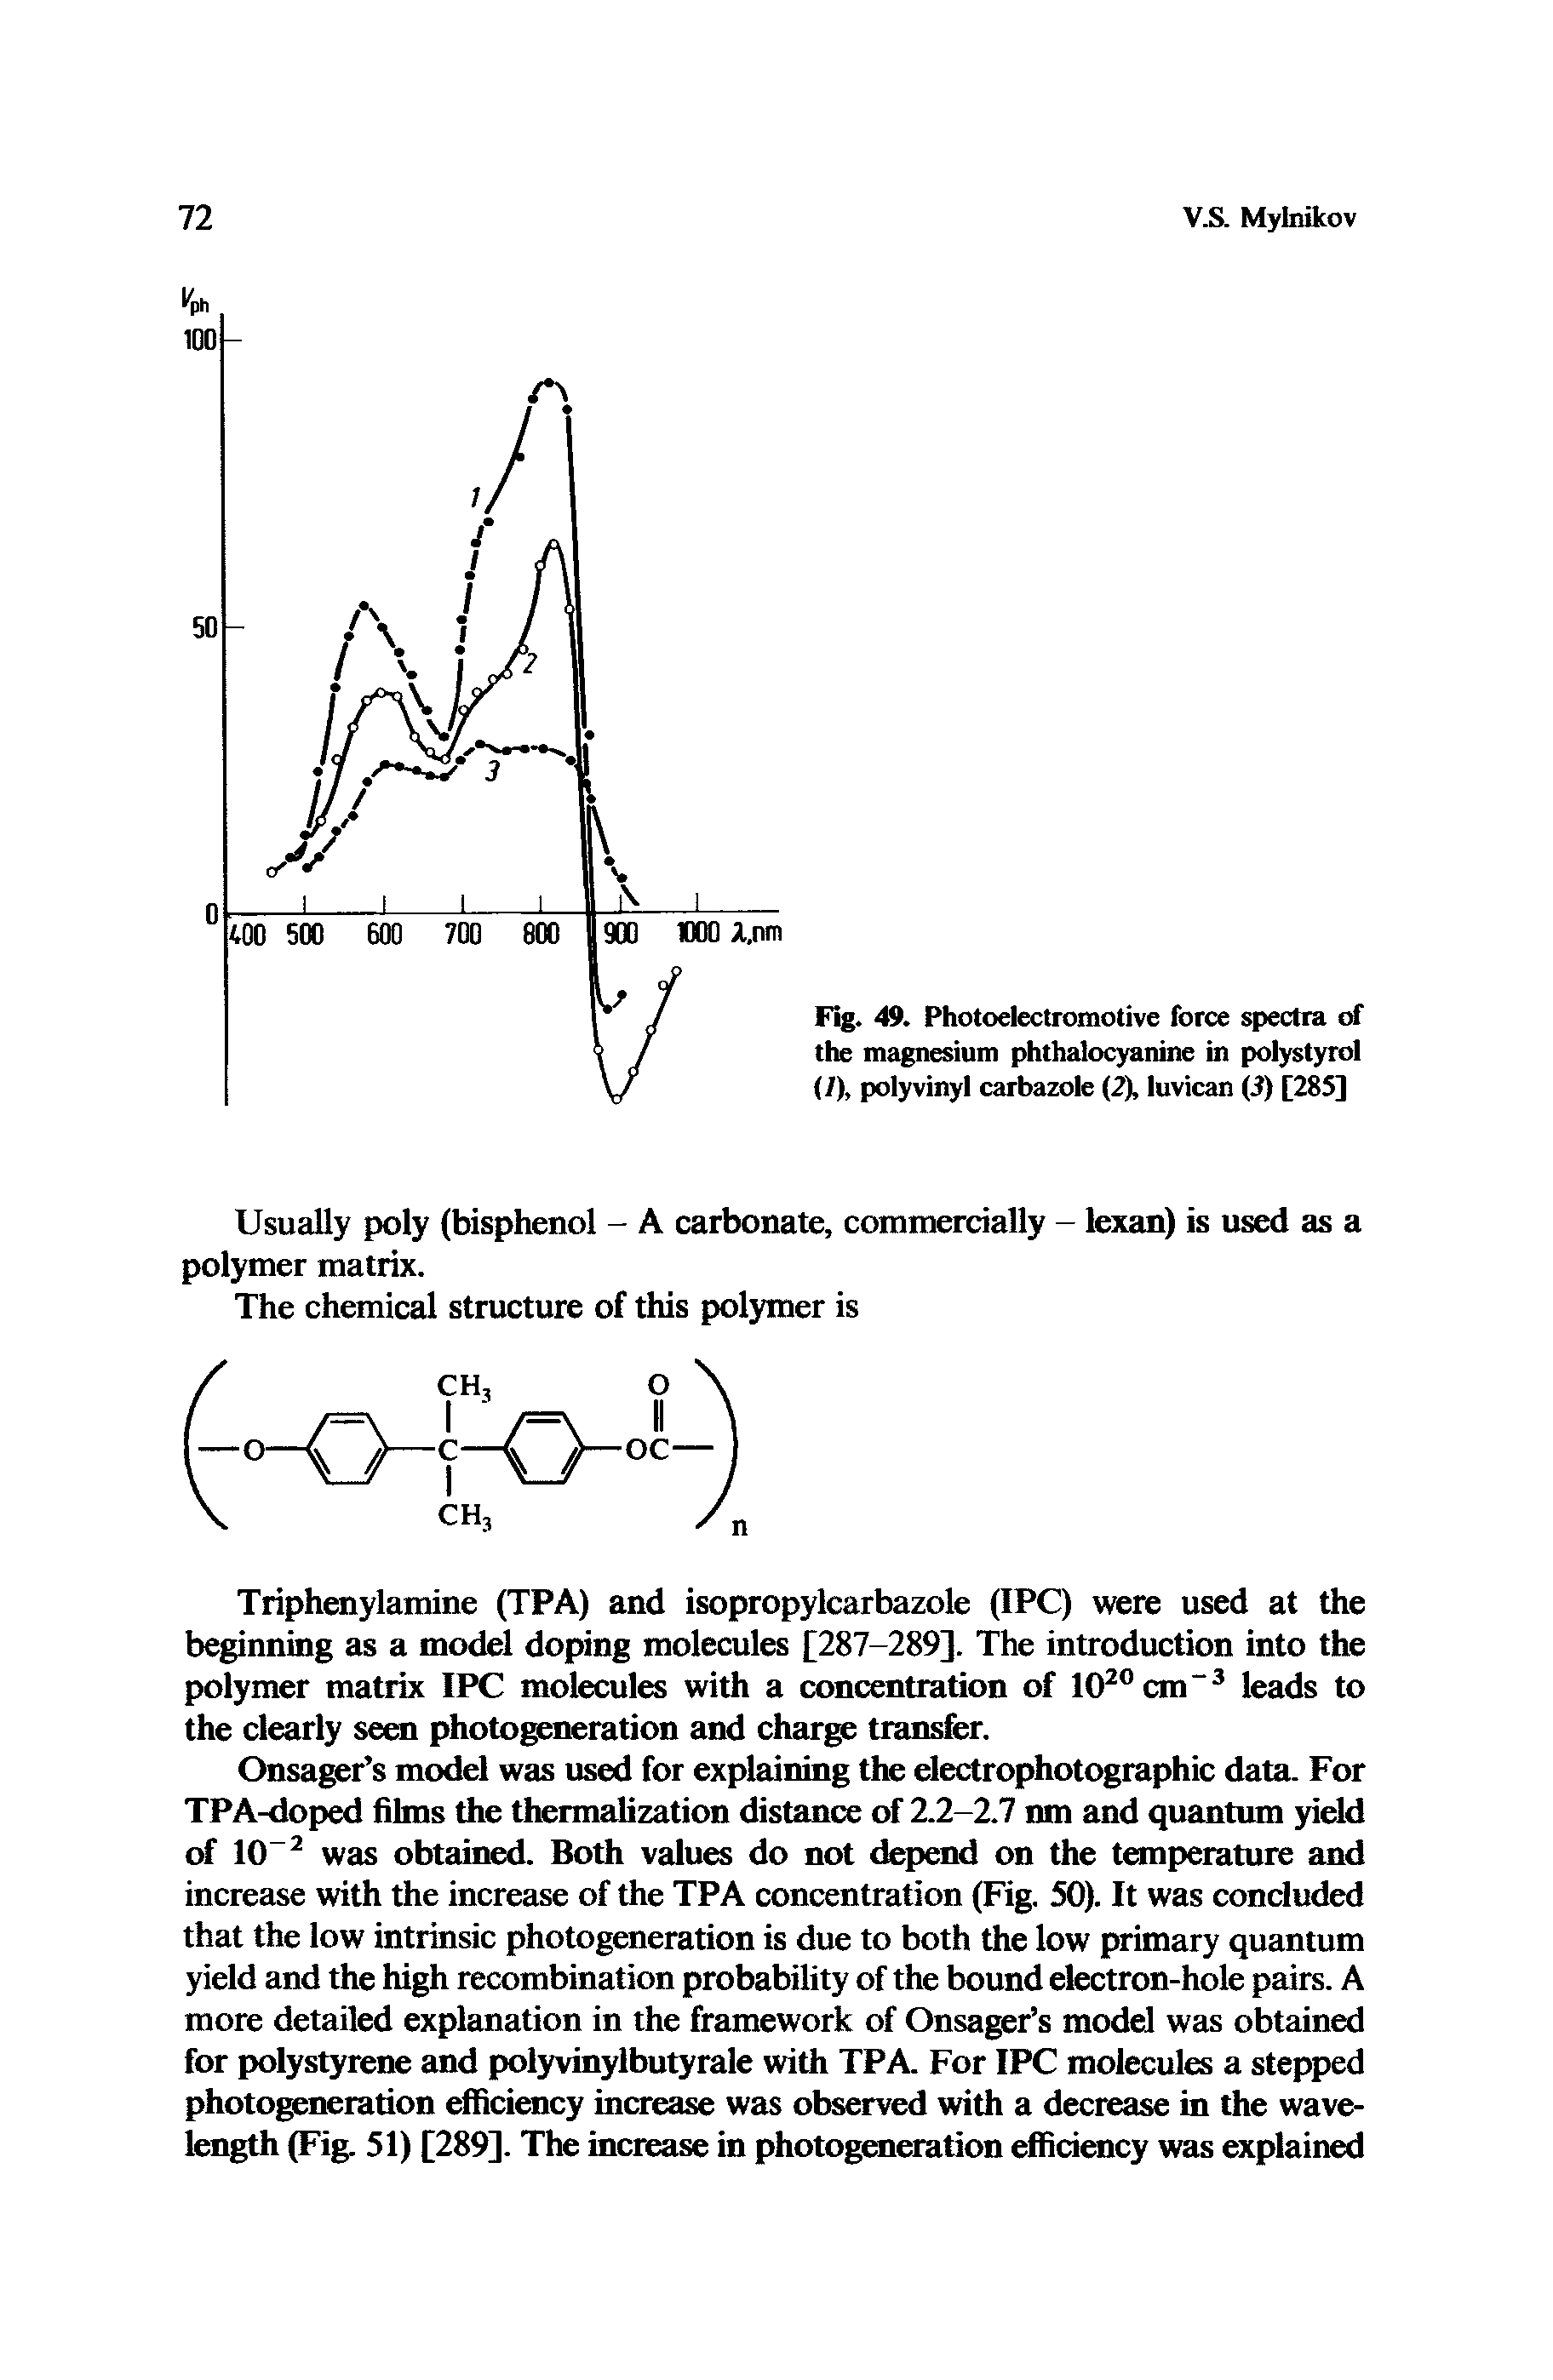 Fig. 49. Photoelectromotive force spectra of the magnesium phthalocyanine in polystyrol (/), polyvinyl carbazole (2), luvican (i) [285]...